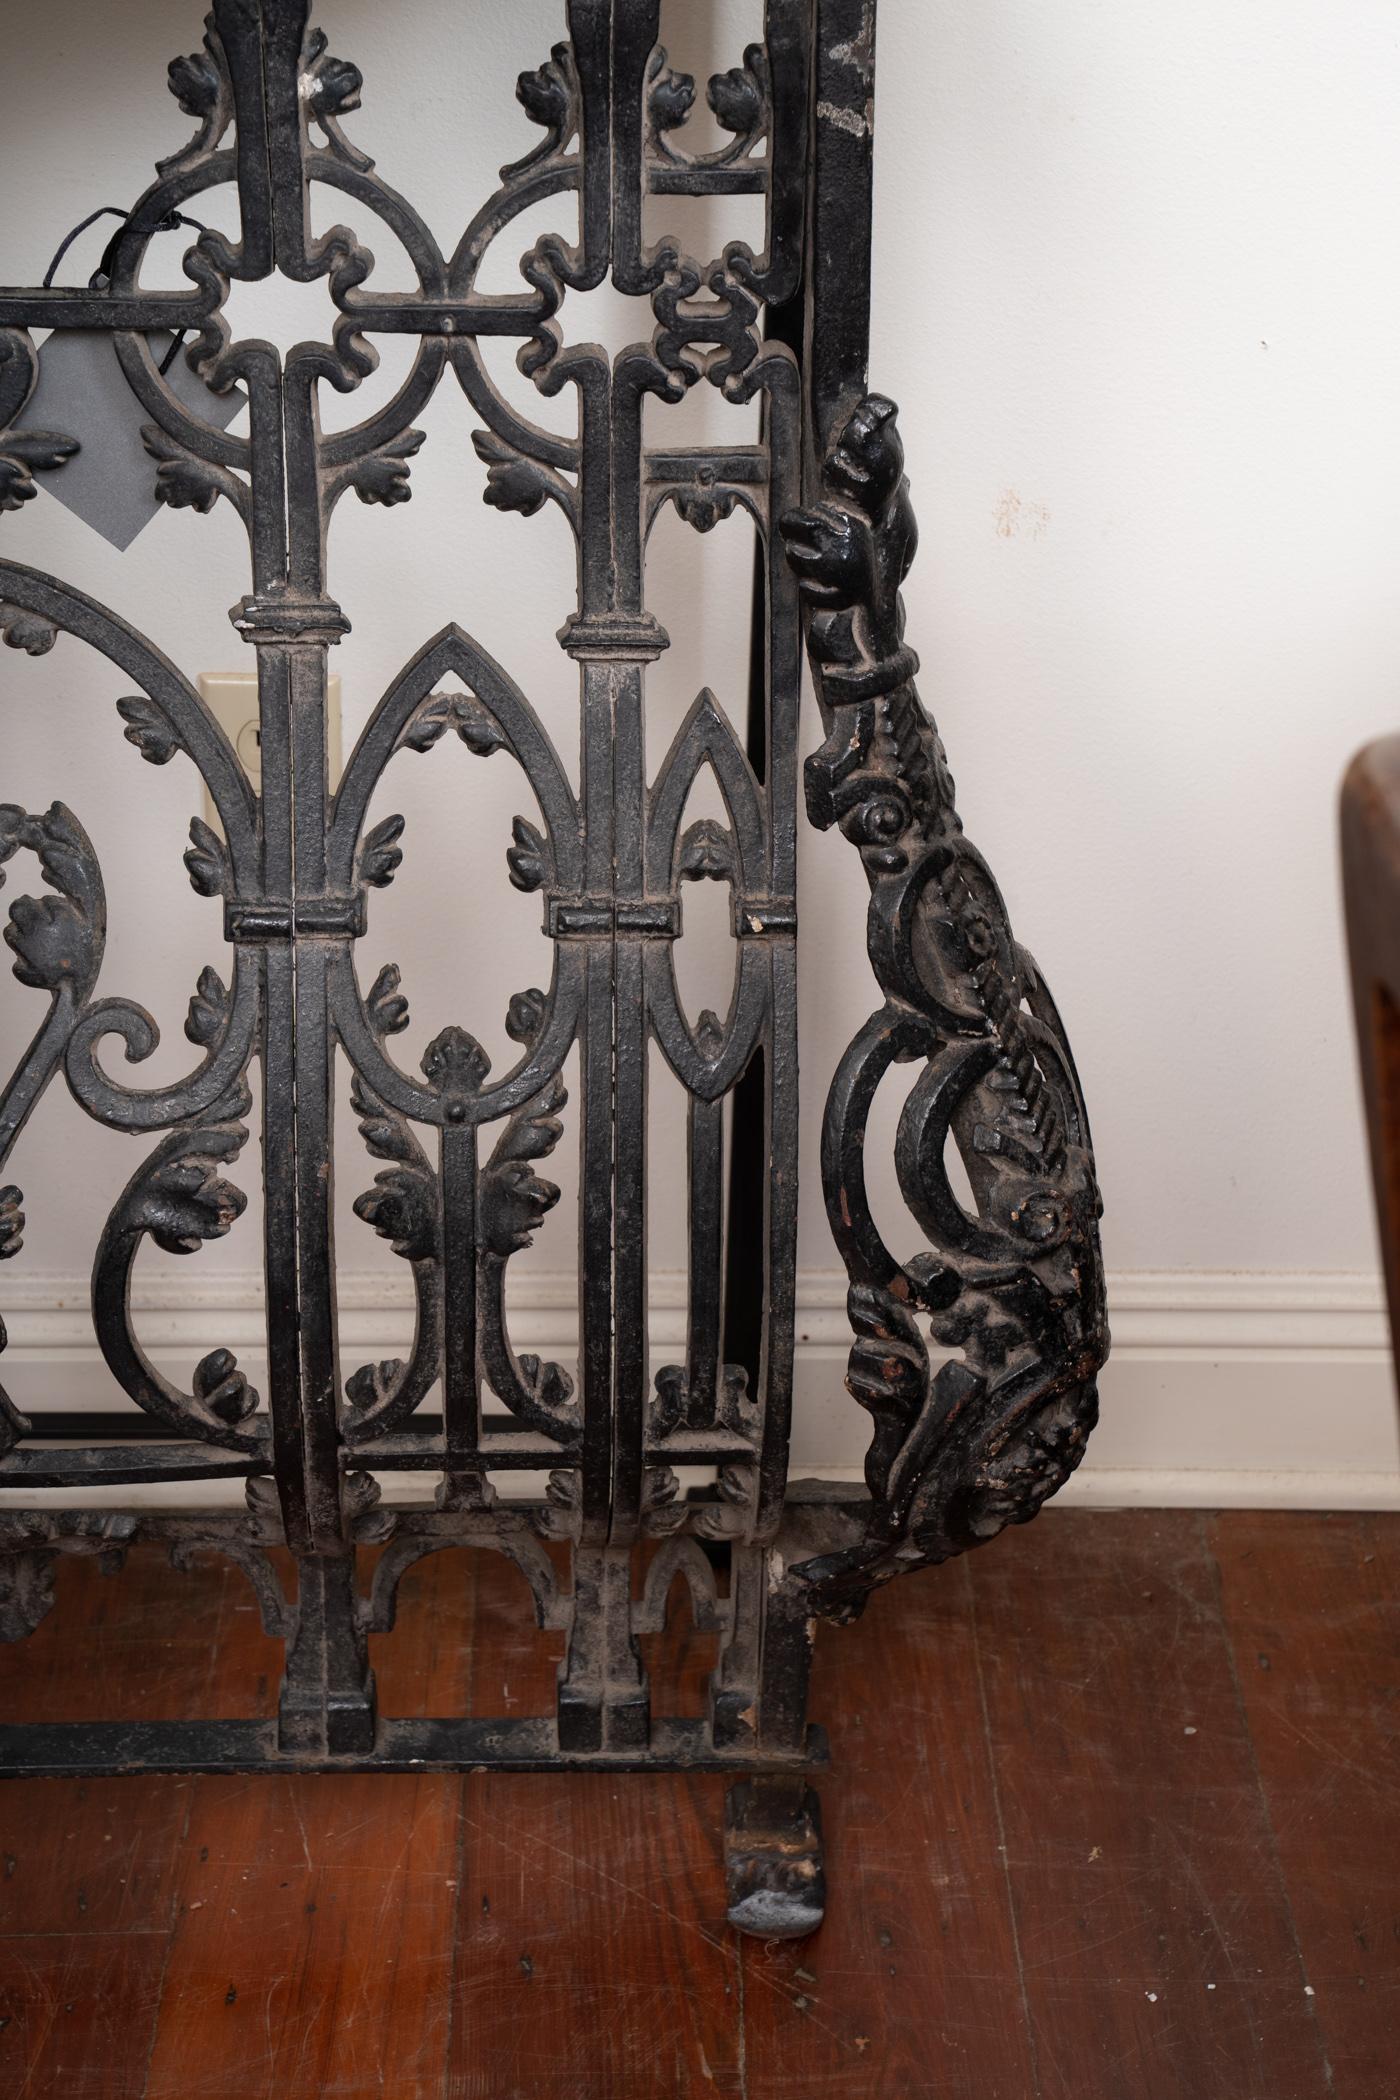 19th century iron balcony with later marble to make wonderful console table.